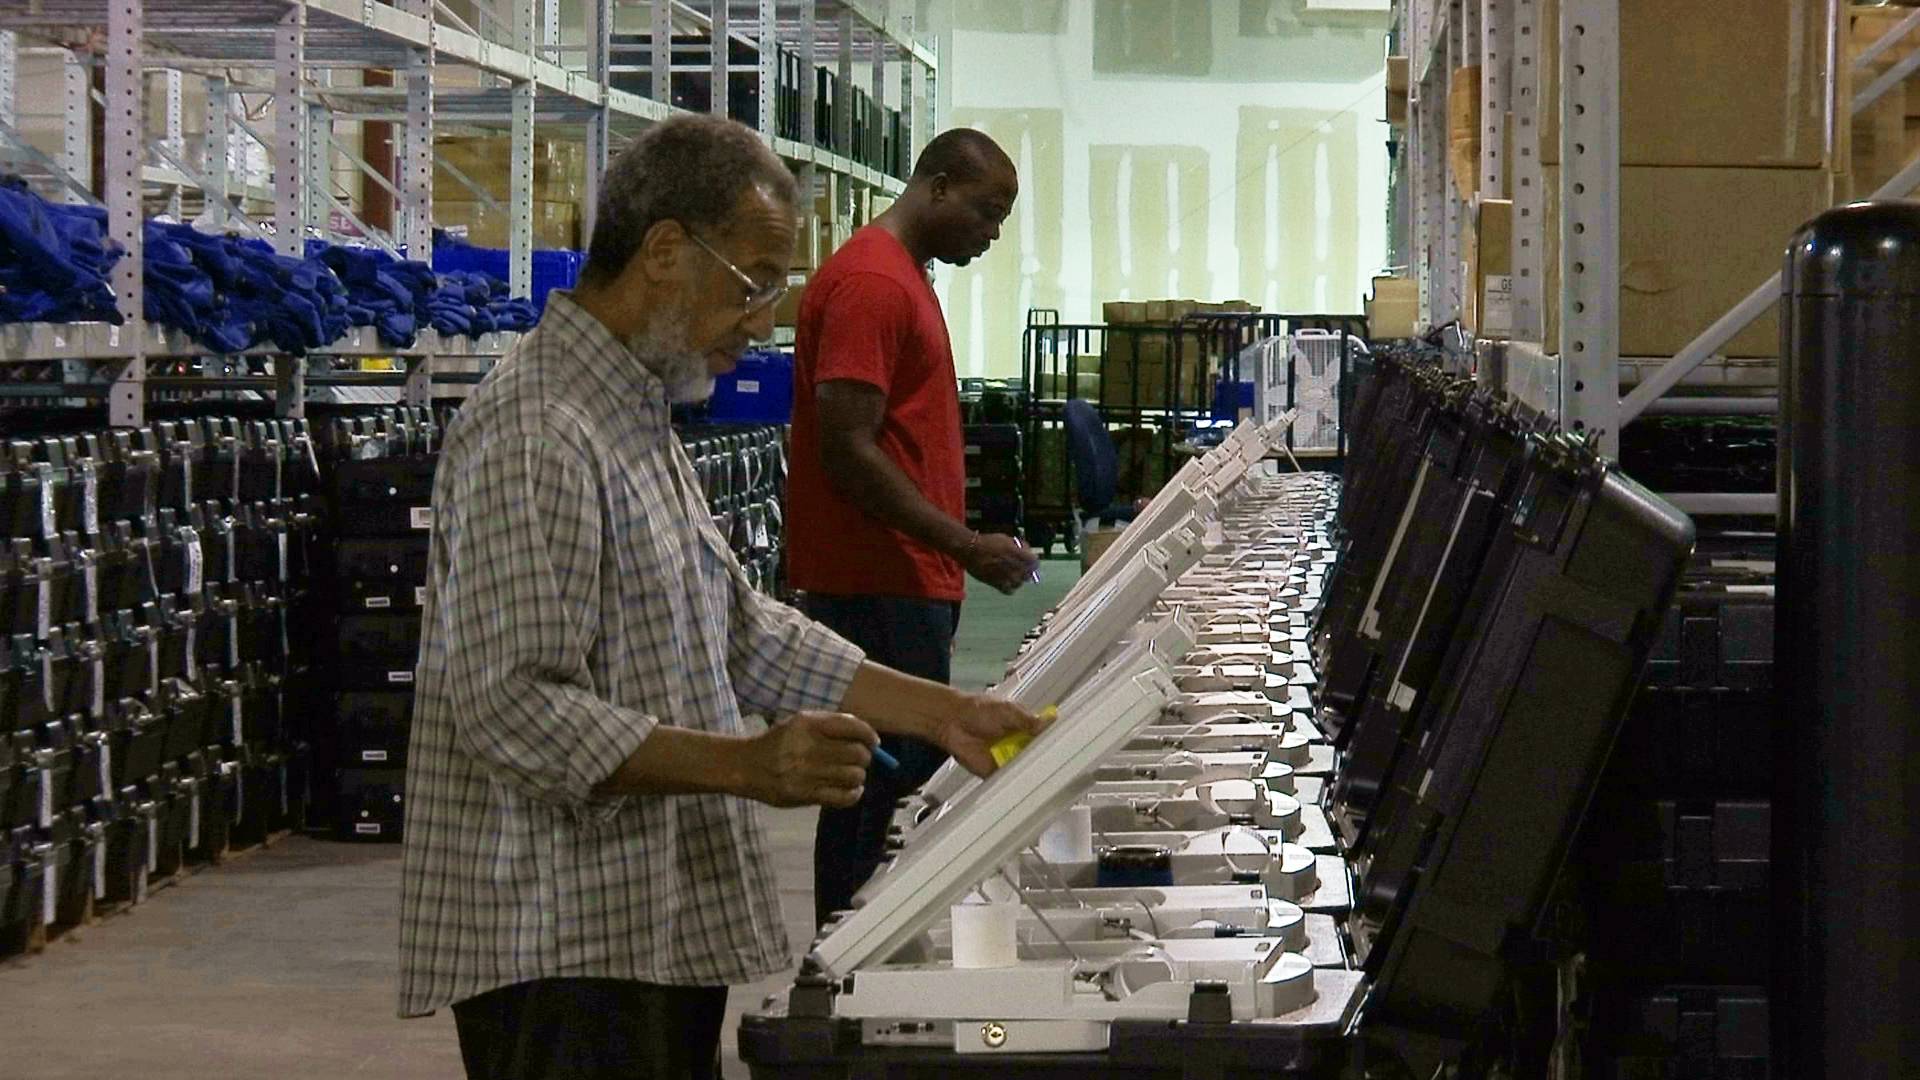 FILE - In this Sept. 22, 2016, file photo, employees of the Fulton County Election Preparation Center in Atlanta test electronic voting machines. A computer security expert says he found that an election server central to a legal battle over the integrity of Georgia elections showed signs of tampering. The server was left exposed to the open internet for at least six months, a problem discovered in August 2016. (AP Photo/Alex Sanz, File)